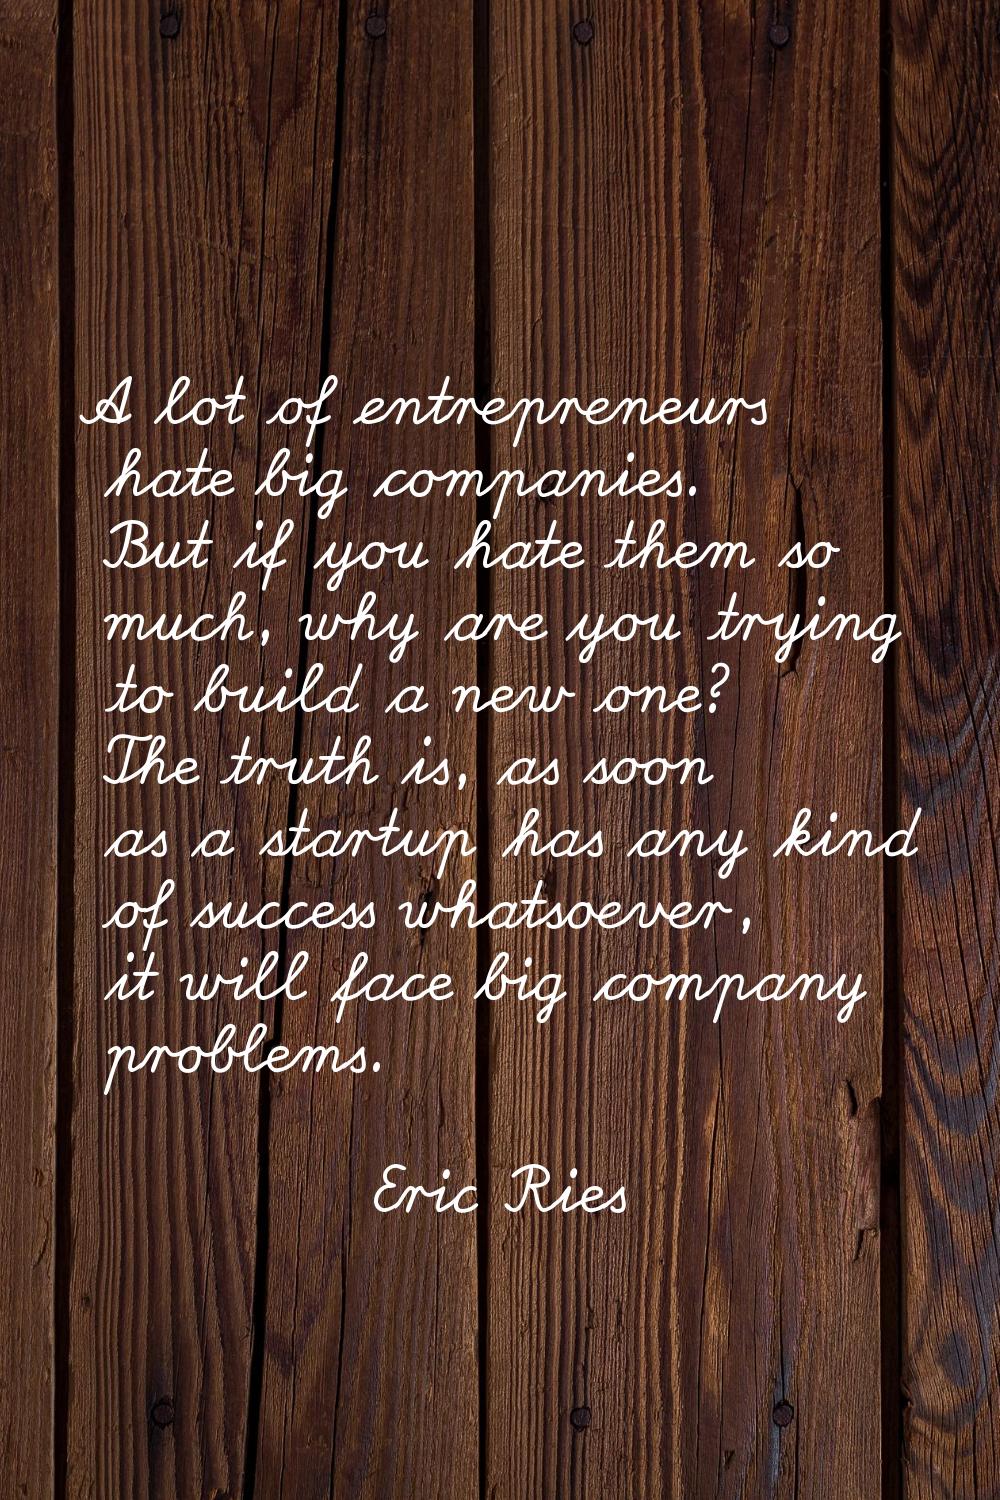 A lot of entrepreneurs hate big companies. But if you hate them so much, why are you trying to buil